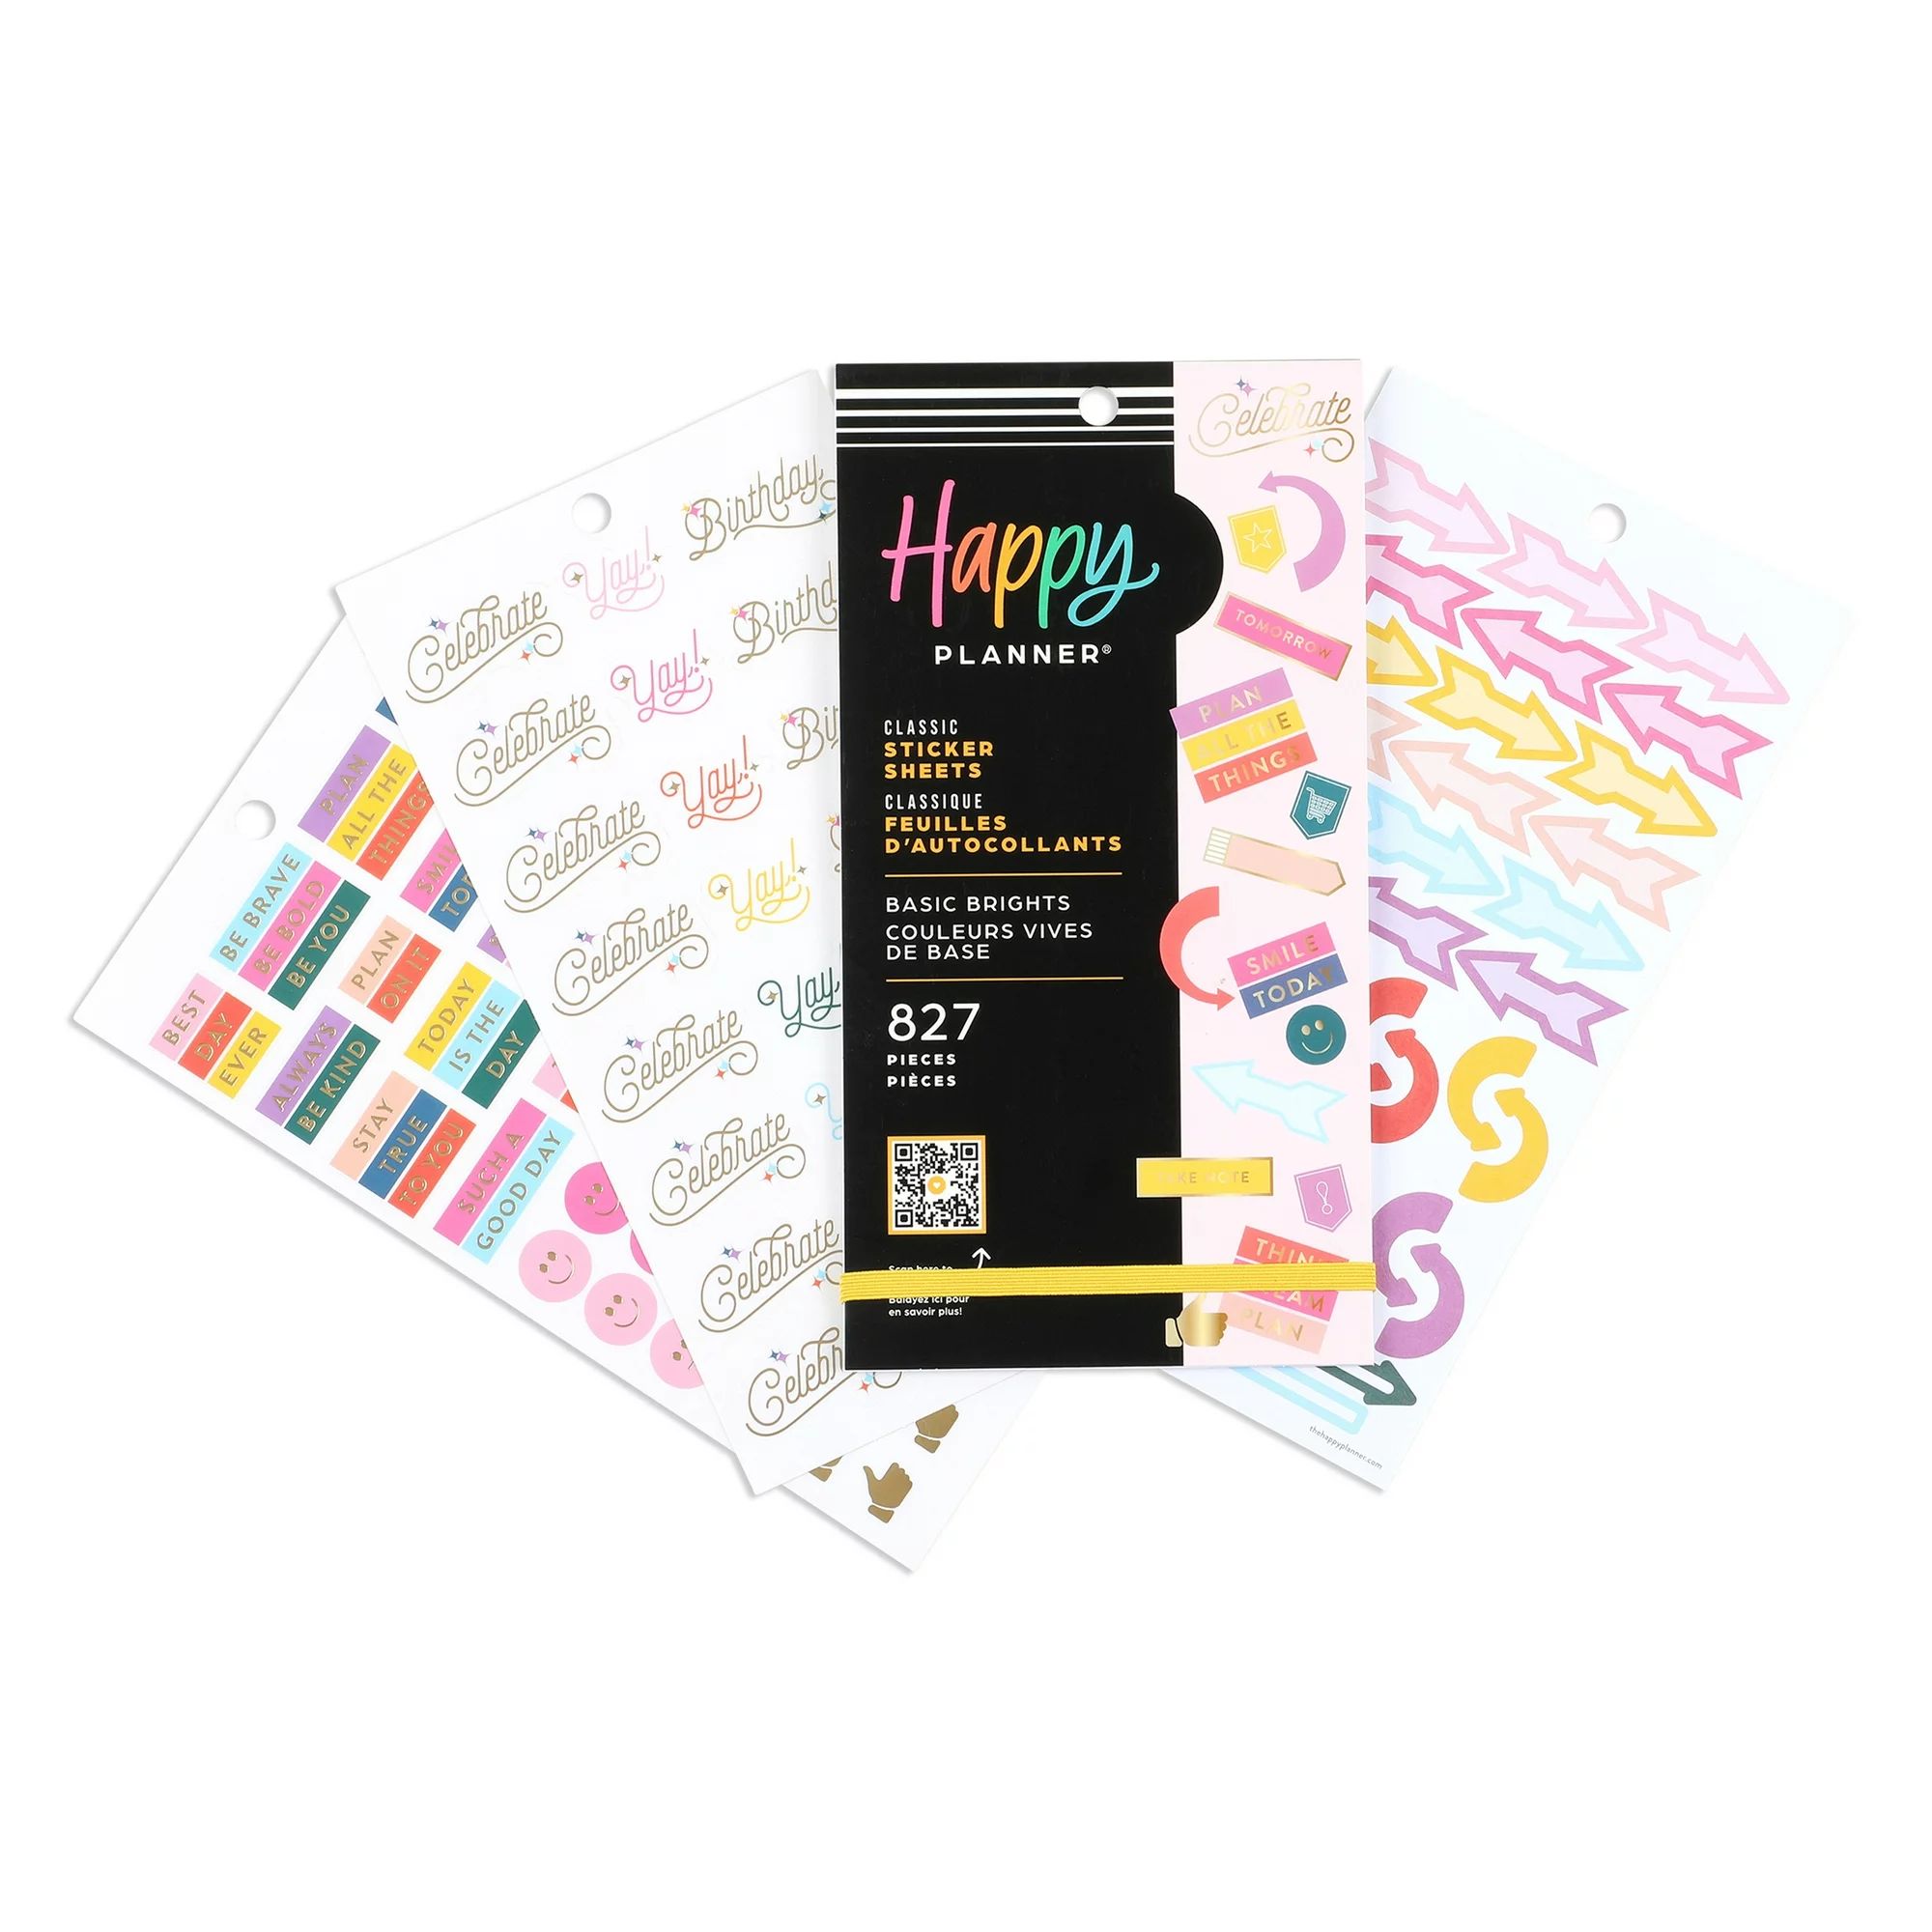 Happy Planner, 10 Sheet Sticker Pack, Basic Brights Theme, 4.75 x 9", 827 Stickers, Multicolor | Walmart (US)